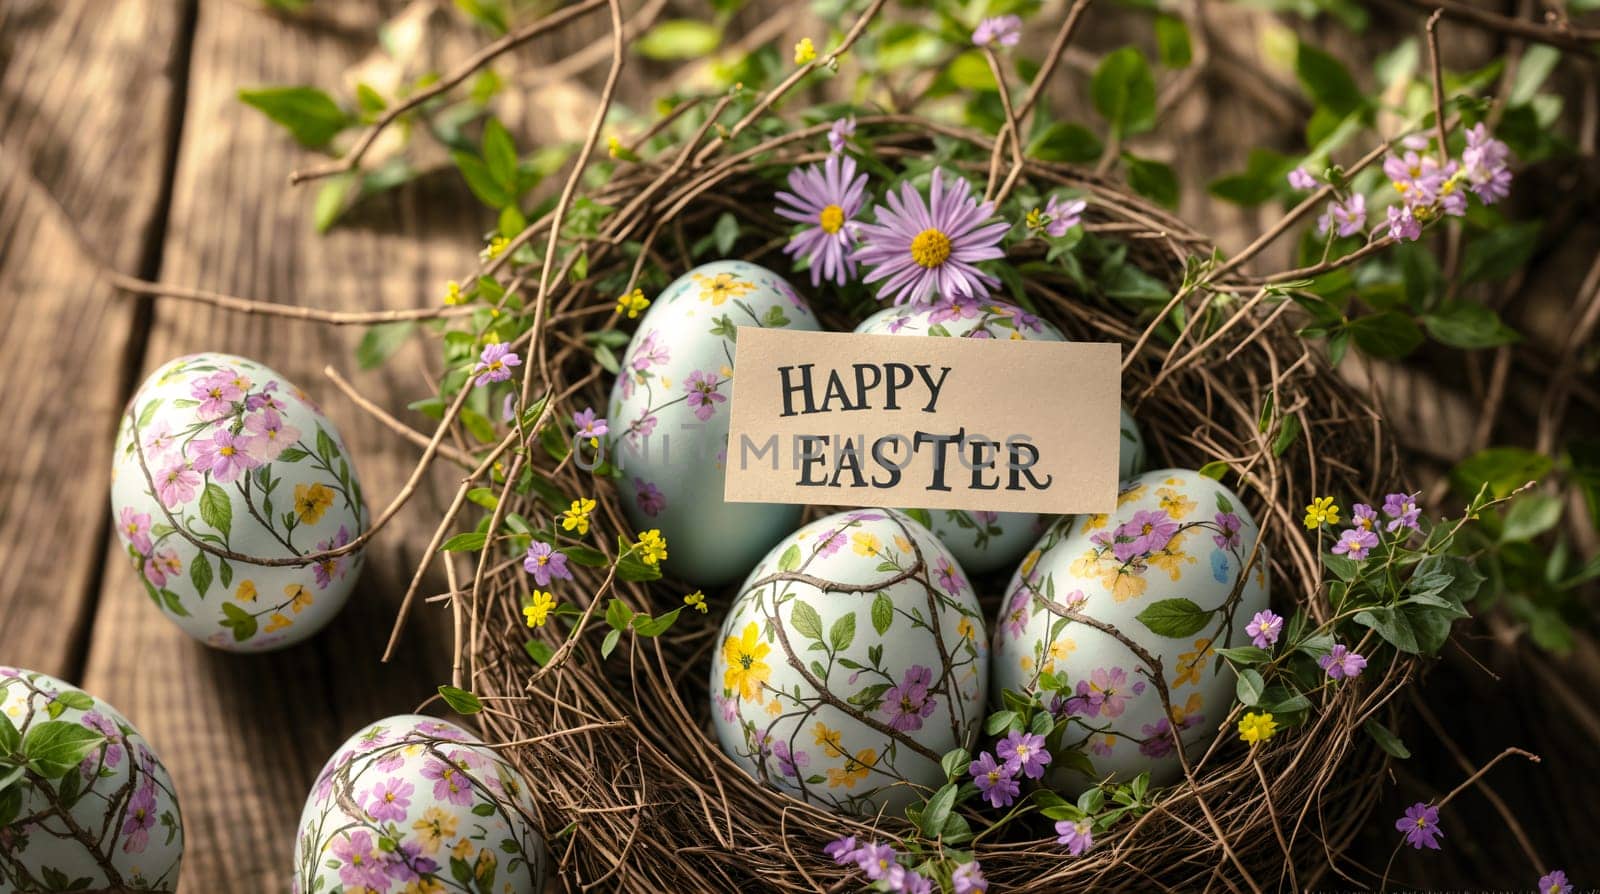 Easter Celebration: Decorated Eggs in a Nest With Spring Flowers and Greeting by chrisroll